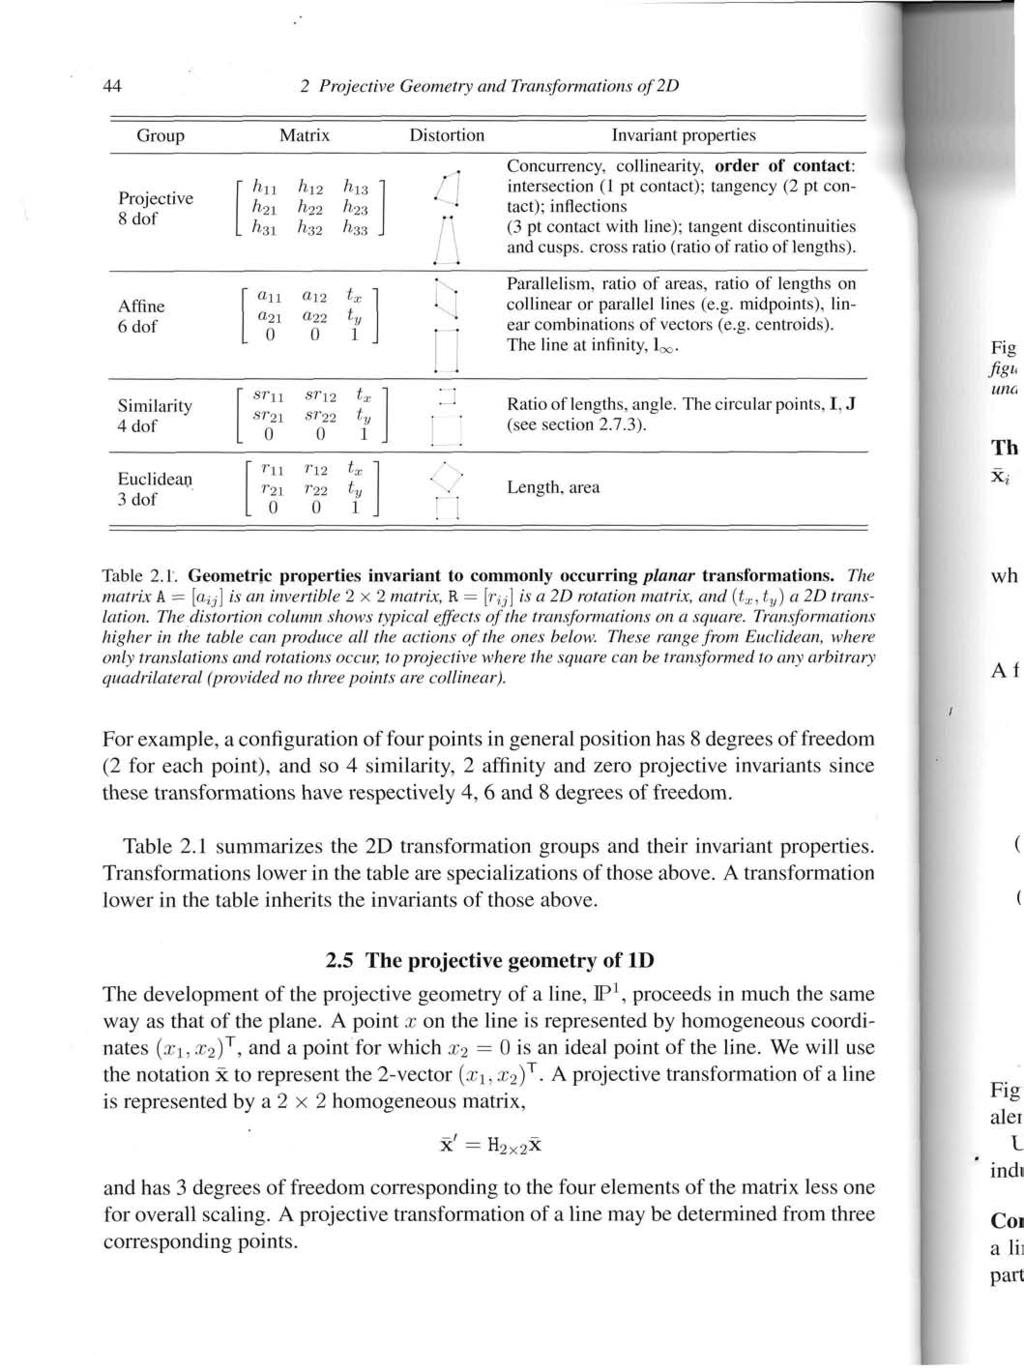 2 Projective Geometry and Transformations of 2D Group Matrix Distortion Invariant properties Projective 8dof /in hu hi S h-21 fl22 h 2 3 h 3 i h 3 2 h 33 Concurrency, collinearity, order of contact: